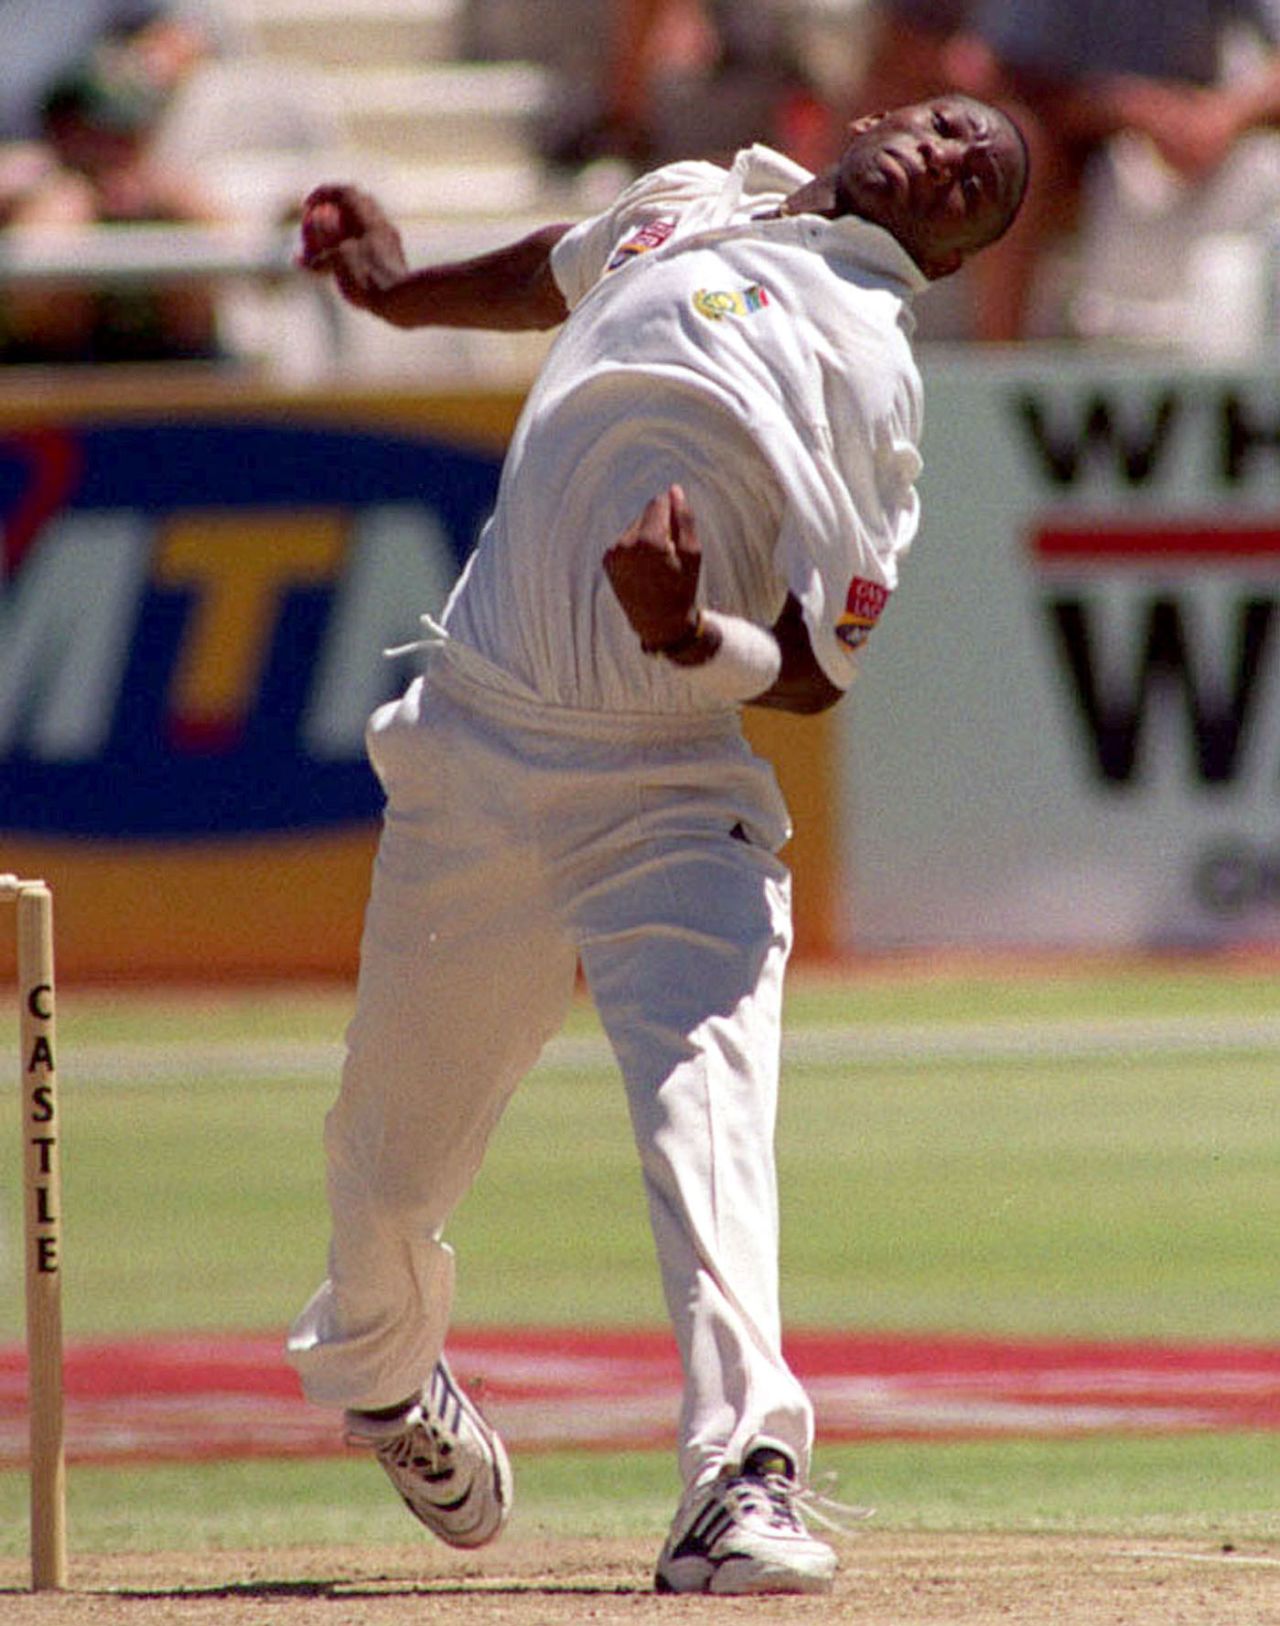 Mfuneko Ngam in action, day one, second Test, South Africa v Sri Lanka, Newlands cricket ground, Cape Town, January 02, 2001 